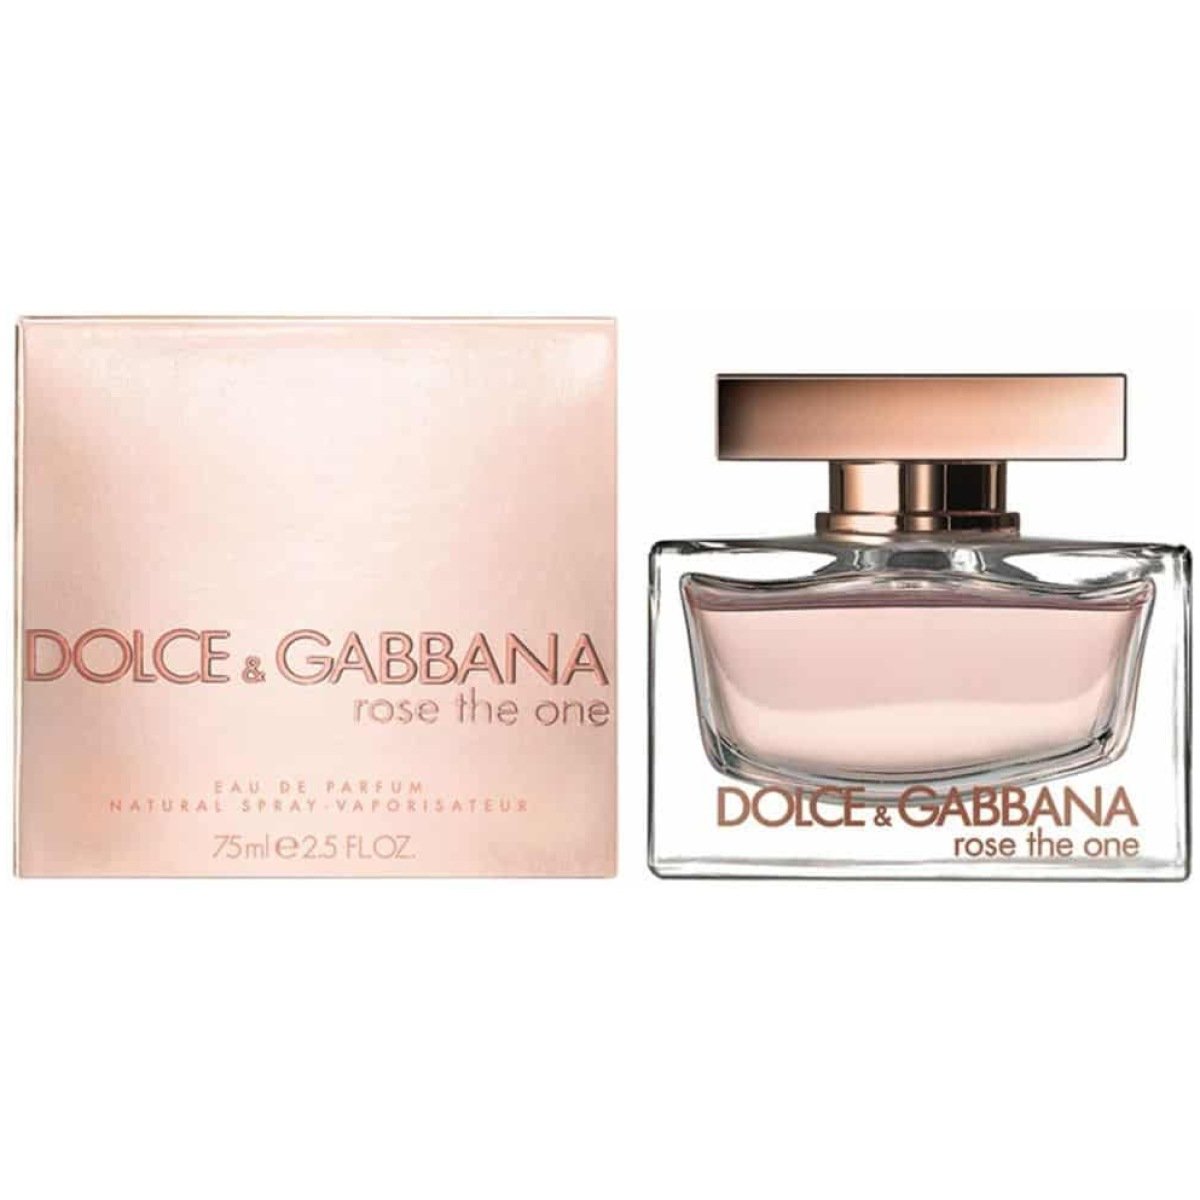 Dolce and Gabbana (D&G) Rose The One EDP Perfume For Women 75ml